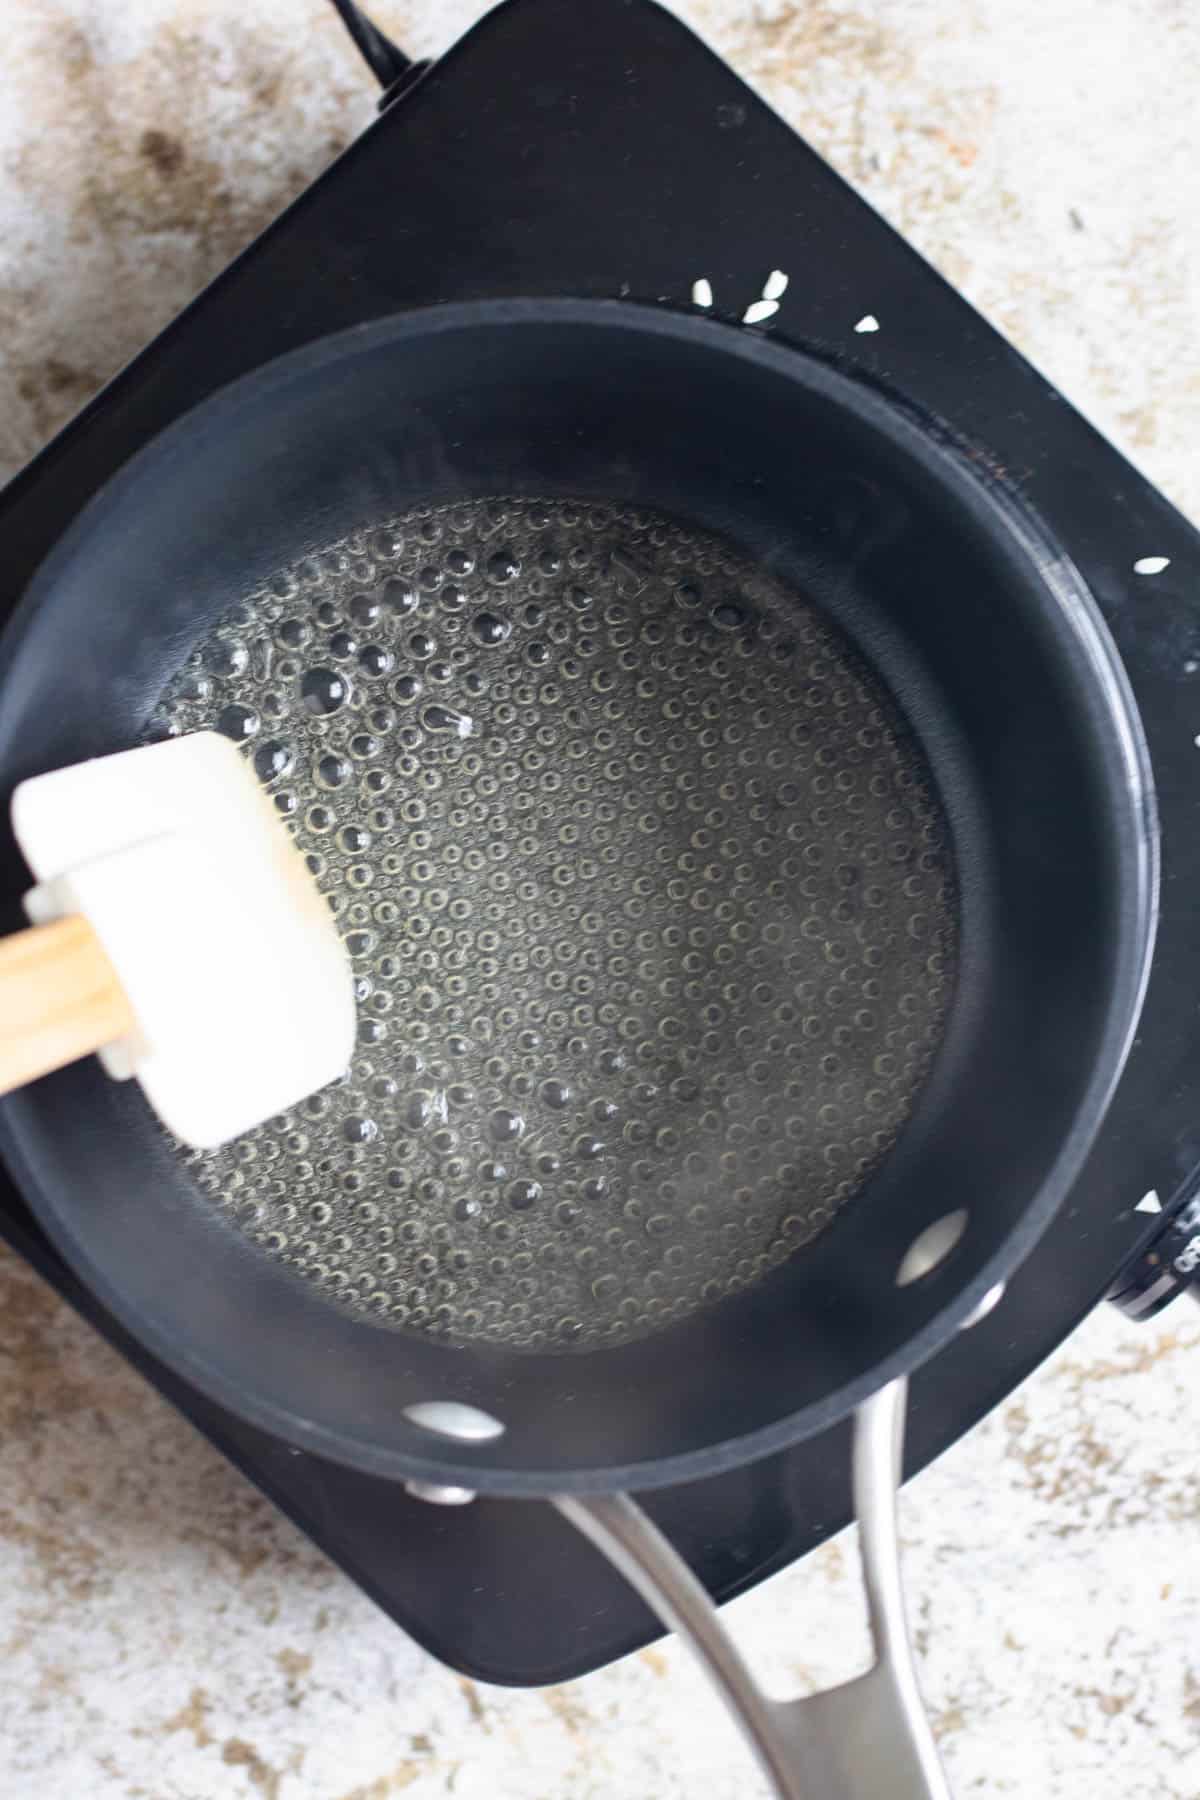 Sugar mixture coming to a boil in a saucepan with a spatula stirring it. 